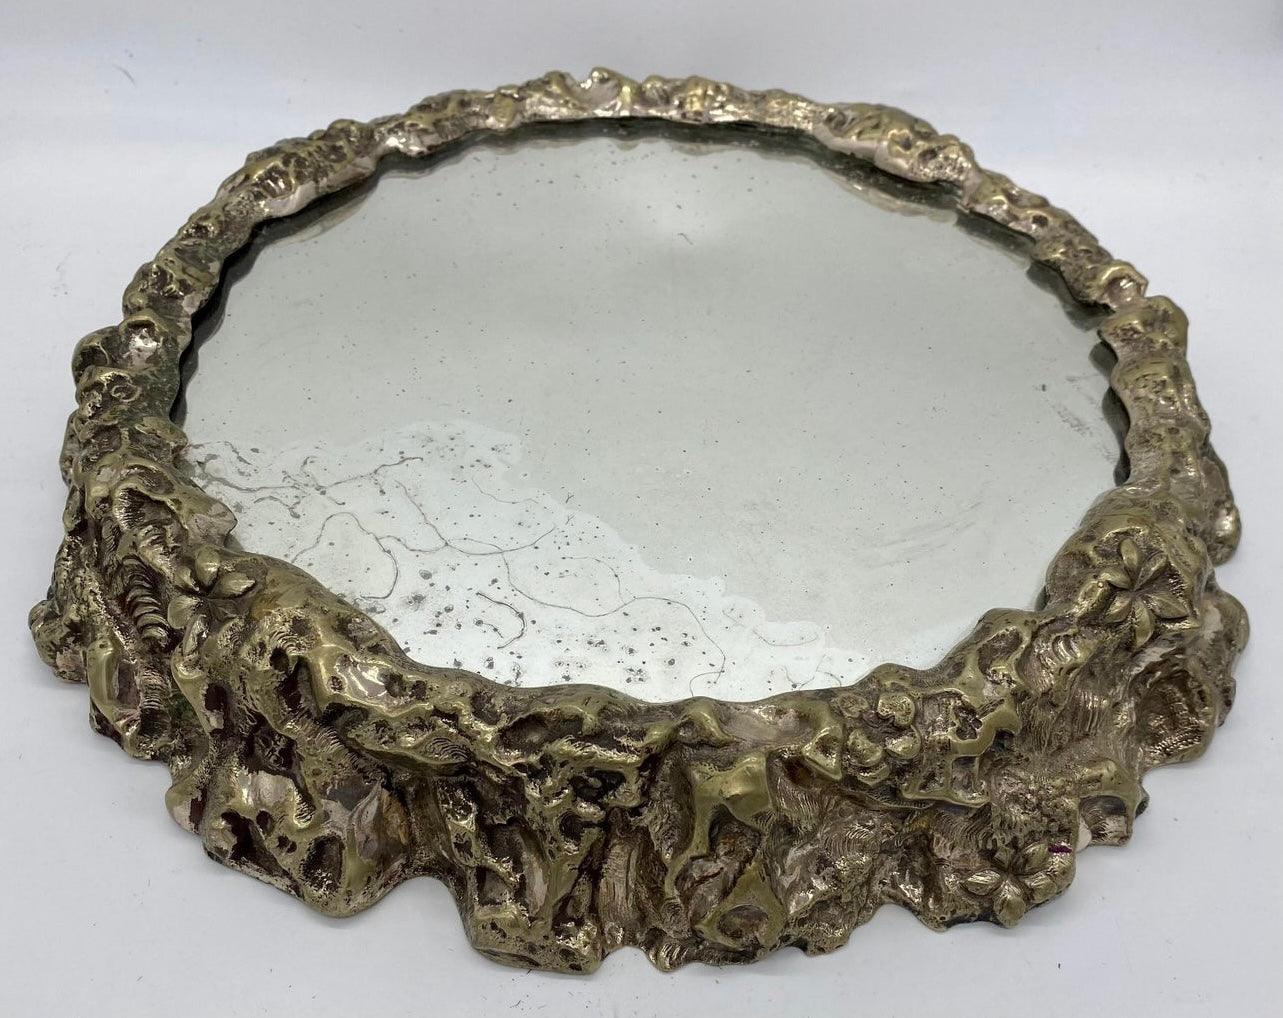 Antique Elkington & Co. Mirrored Silver Plate Centerpiece With a Naturalistic Textured Pattern - Circa 19th Century - The White Barn Antiques